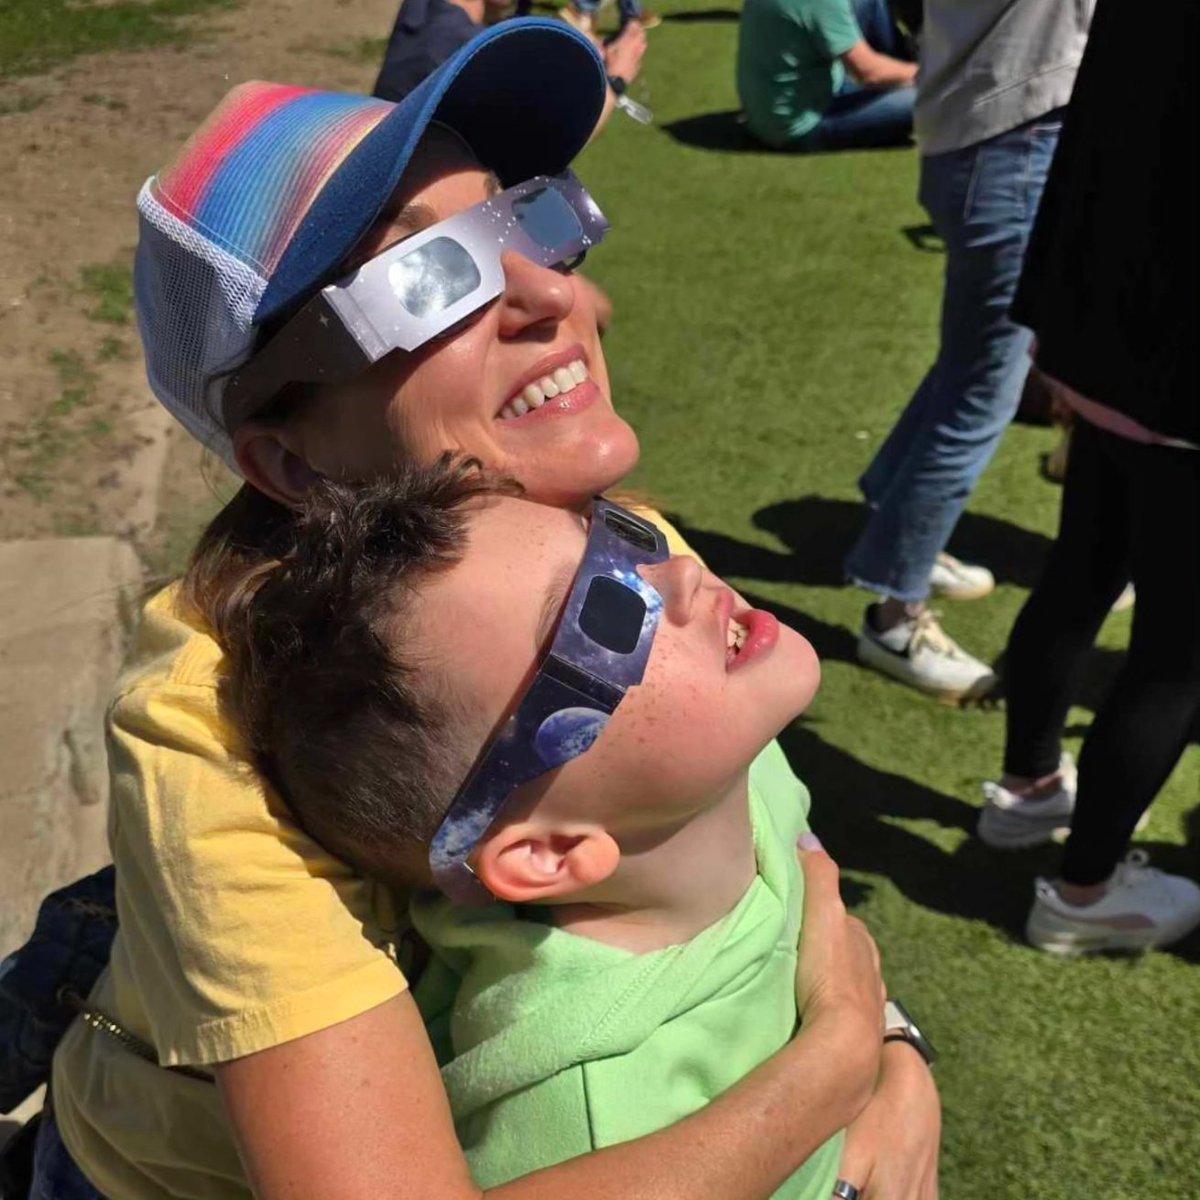 Happy Solar Eclipse! Thanks @SMSD_Corinth for making it family friendly! #Eclipse2024 #SolarEclipse2024